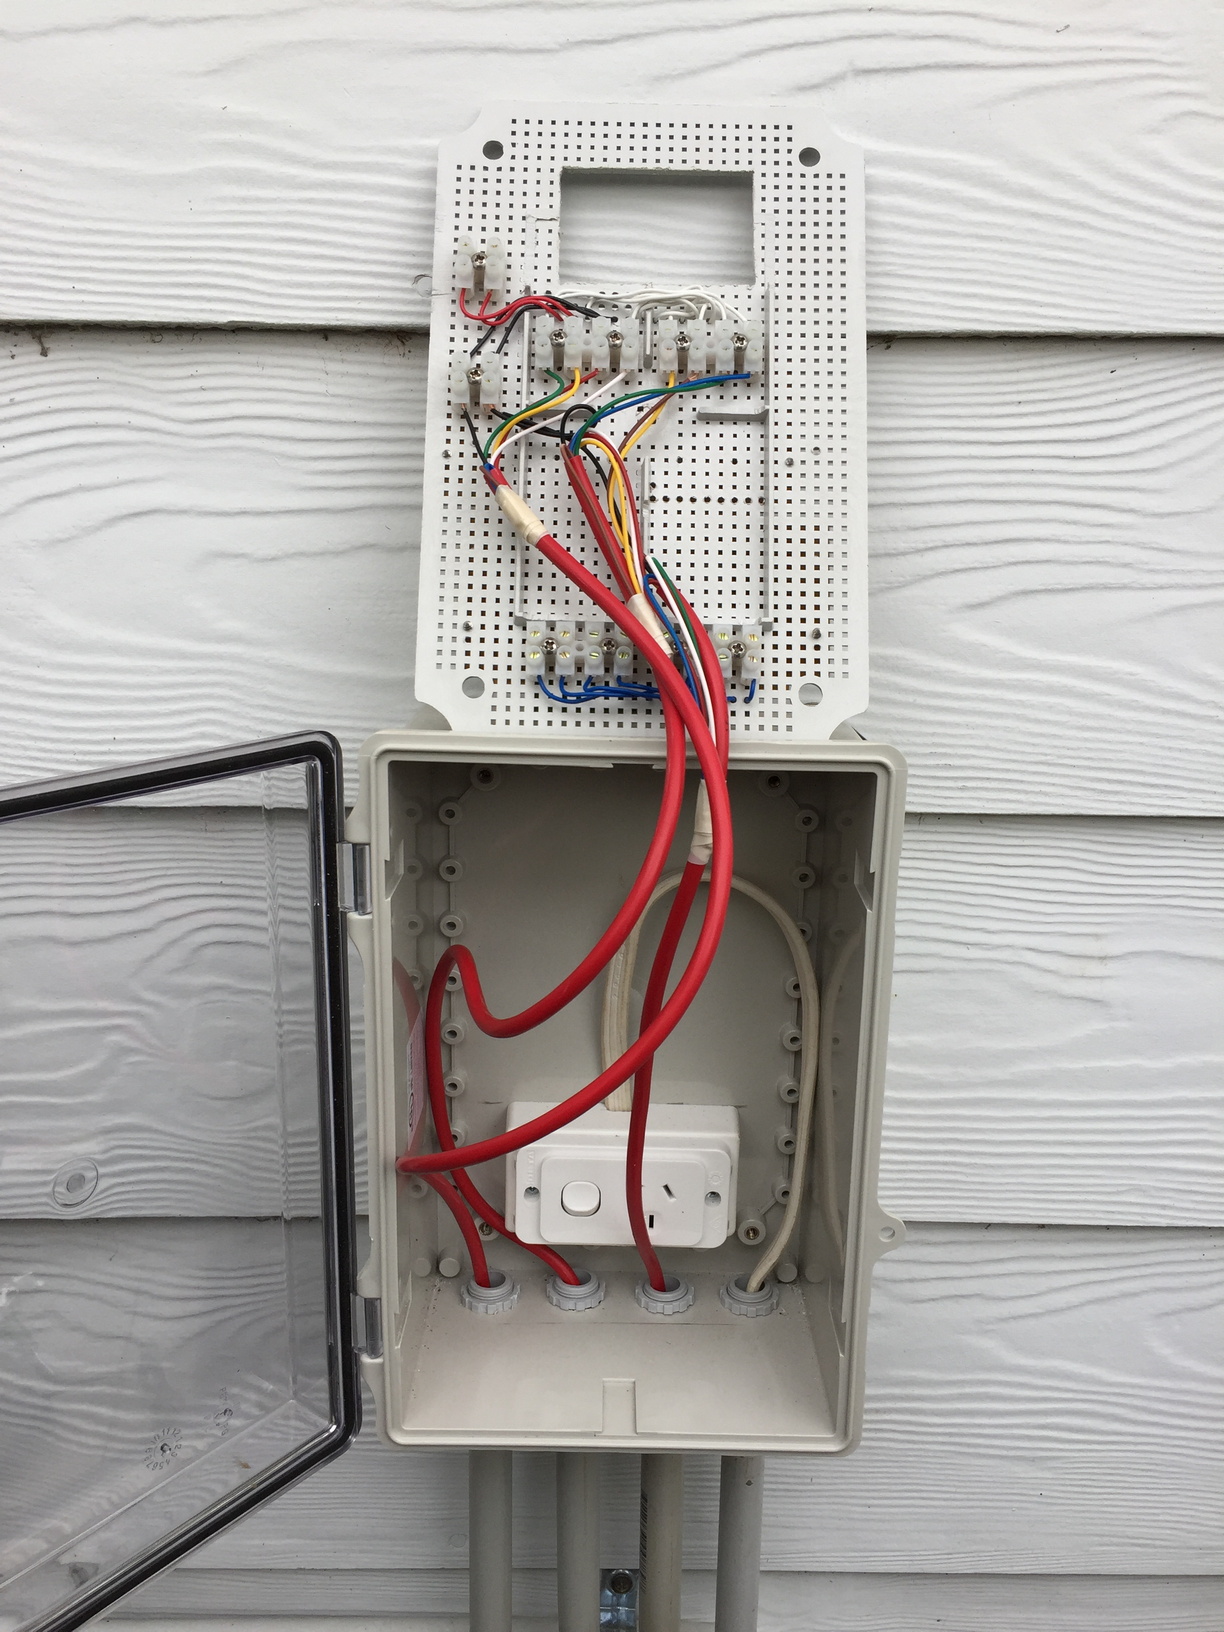 Enclosure mounted outside near my electrical box with the panel flipped and sitting above the enclosure